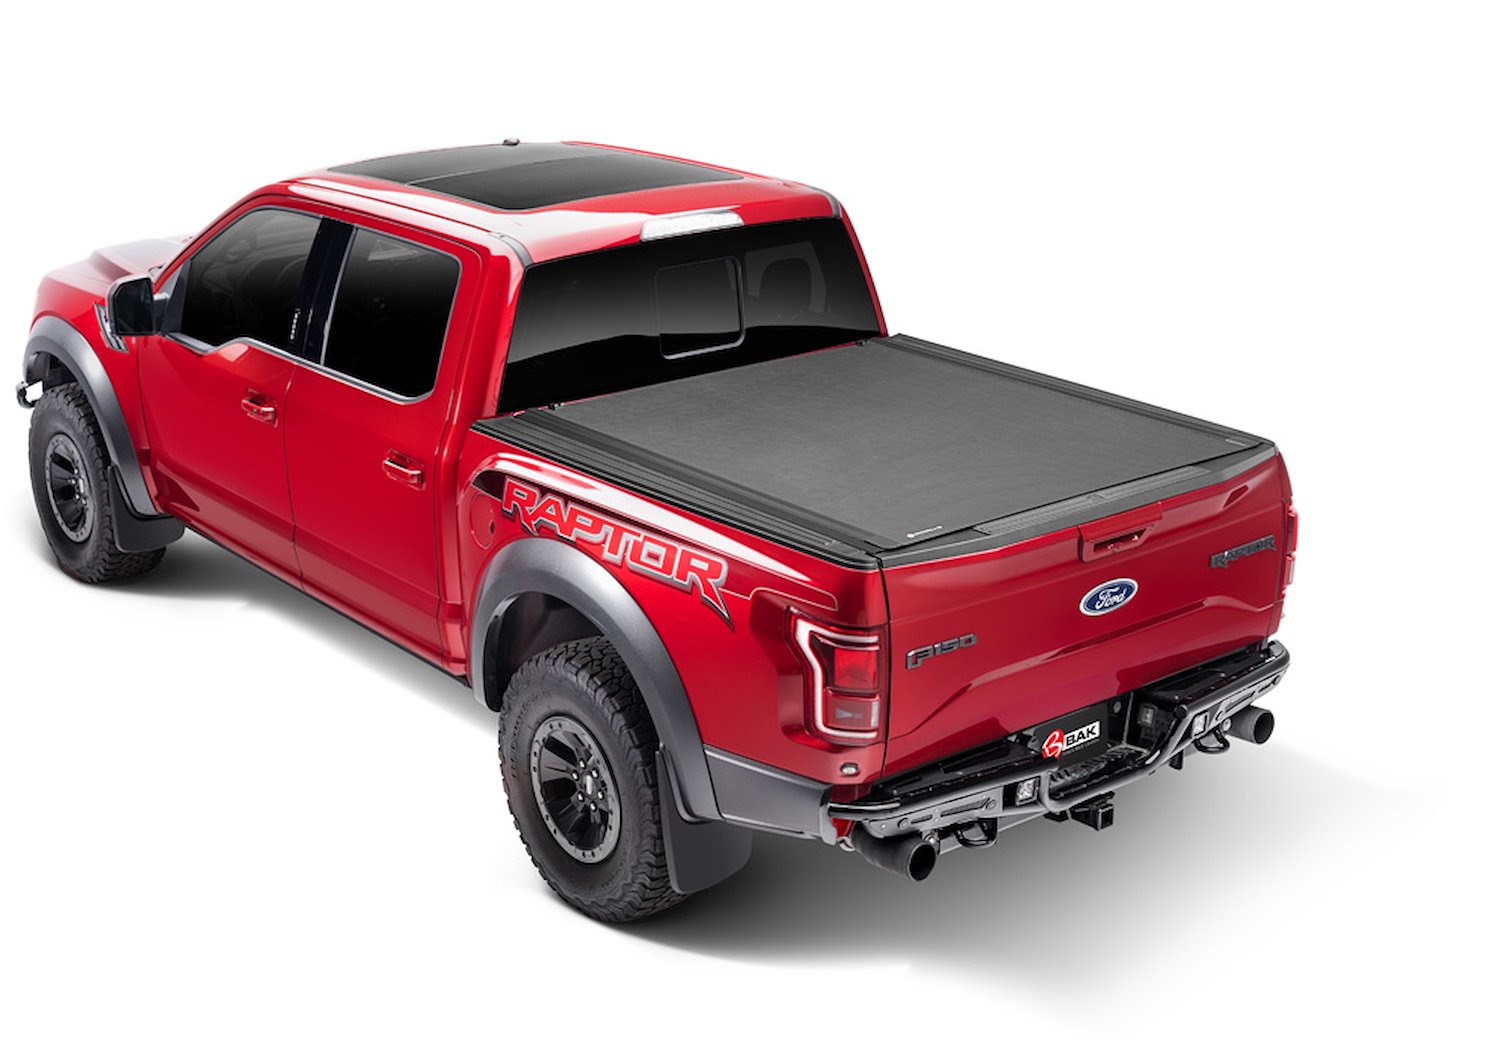 80441 Revolver X4s for Fits Select Toyota Tundra 6.6 ft. Bed, Roll-Up Hard Cover Style [Black Finish]